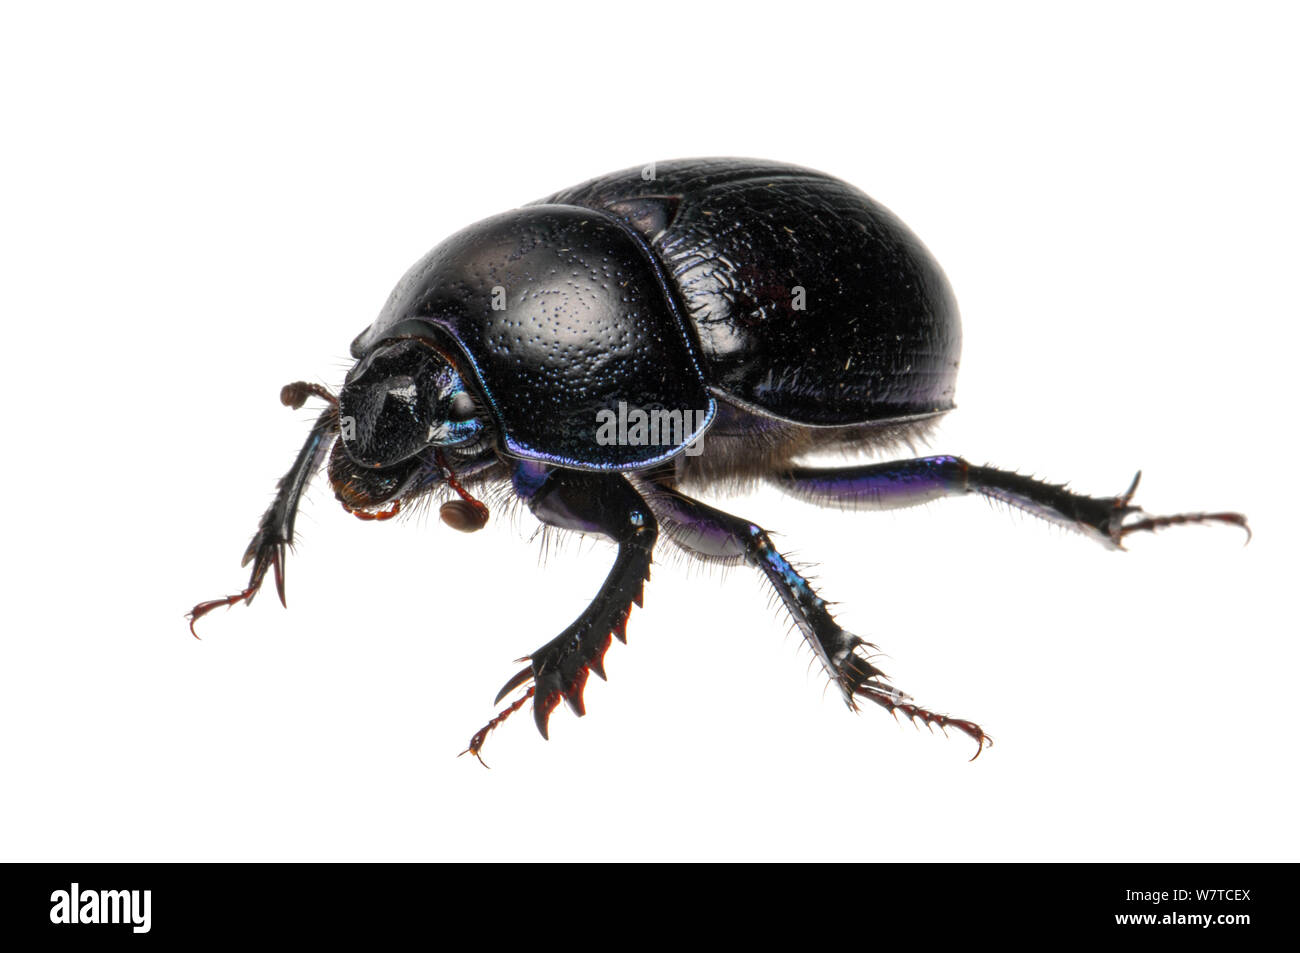 Forest Dung Beetle (Anoplotrupes stercorosus), Slovenia, Europa, giugno progetto Meetyourneighbors.net Foto Stock